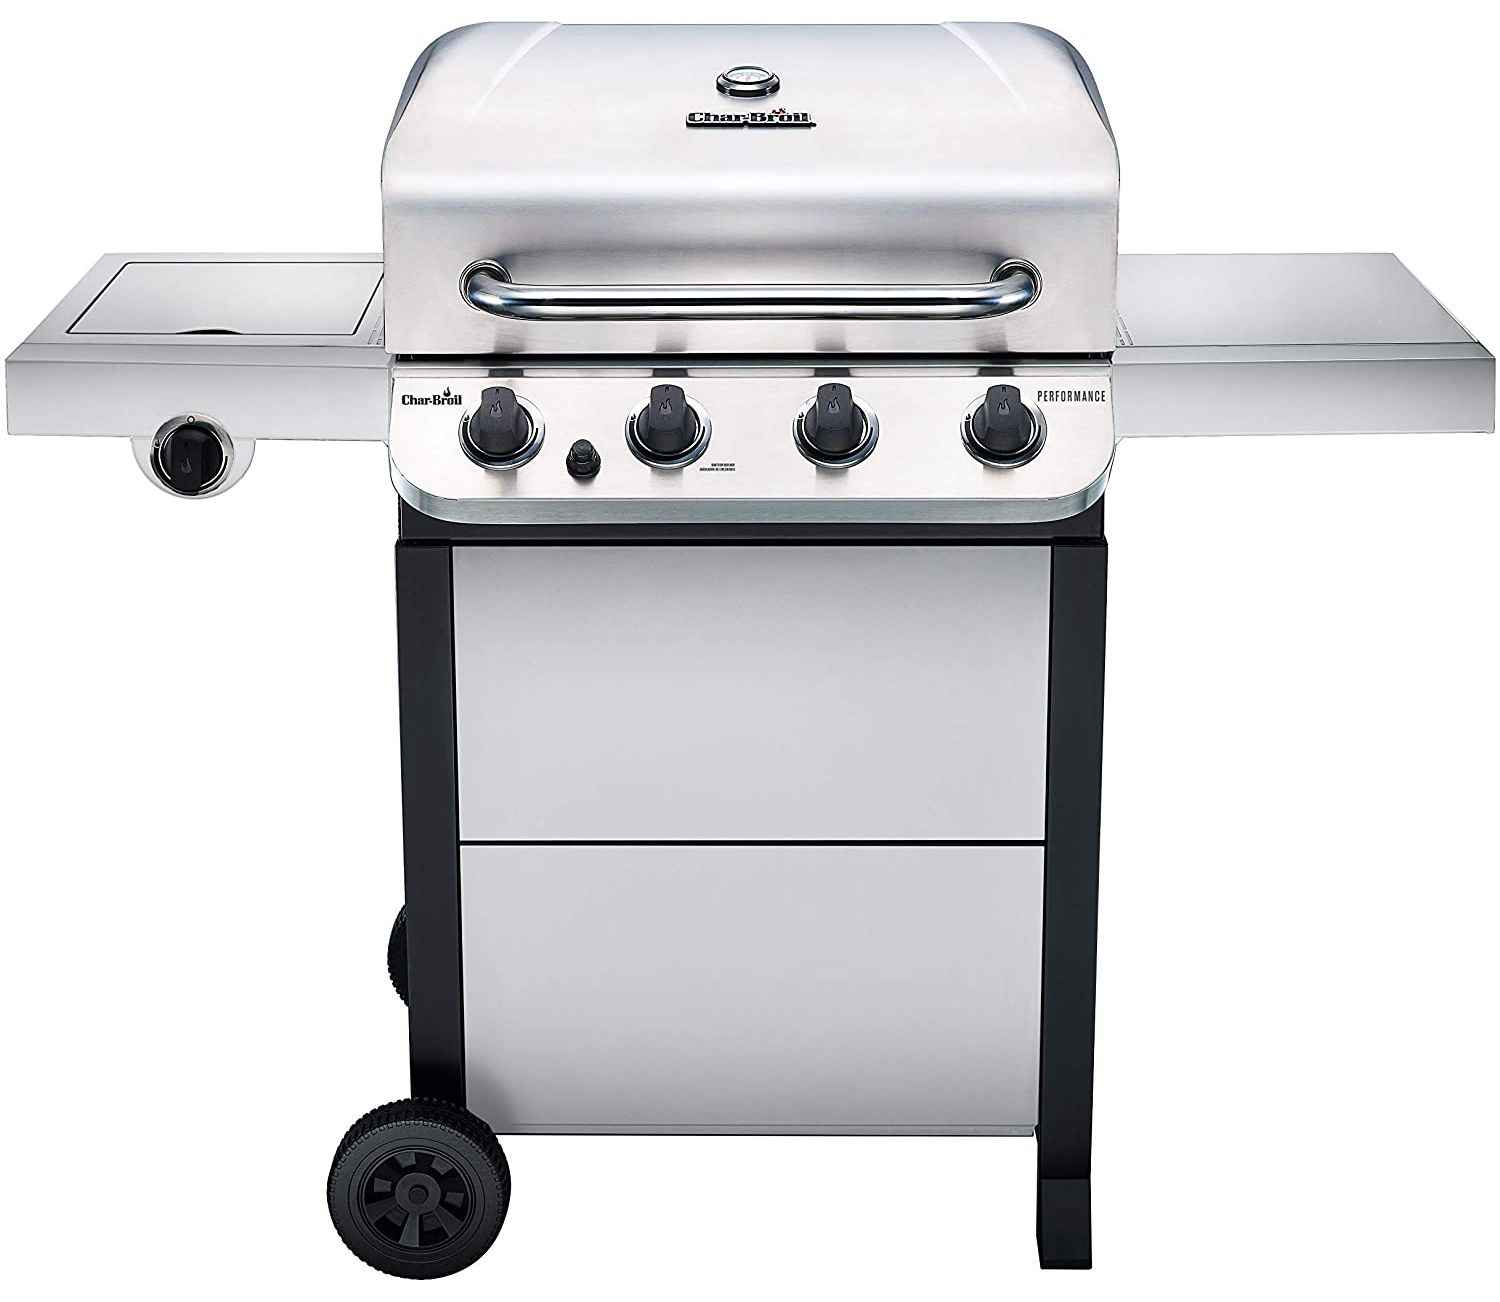 The NetDigz Editors rate the Char-Broil Performance as the Best Entry Gas Grill.